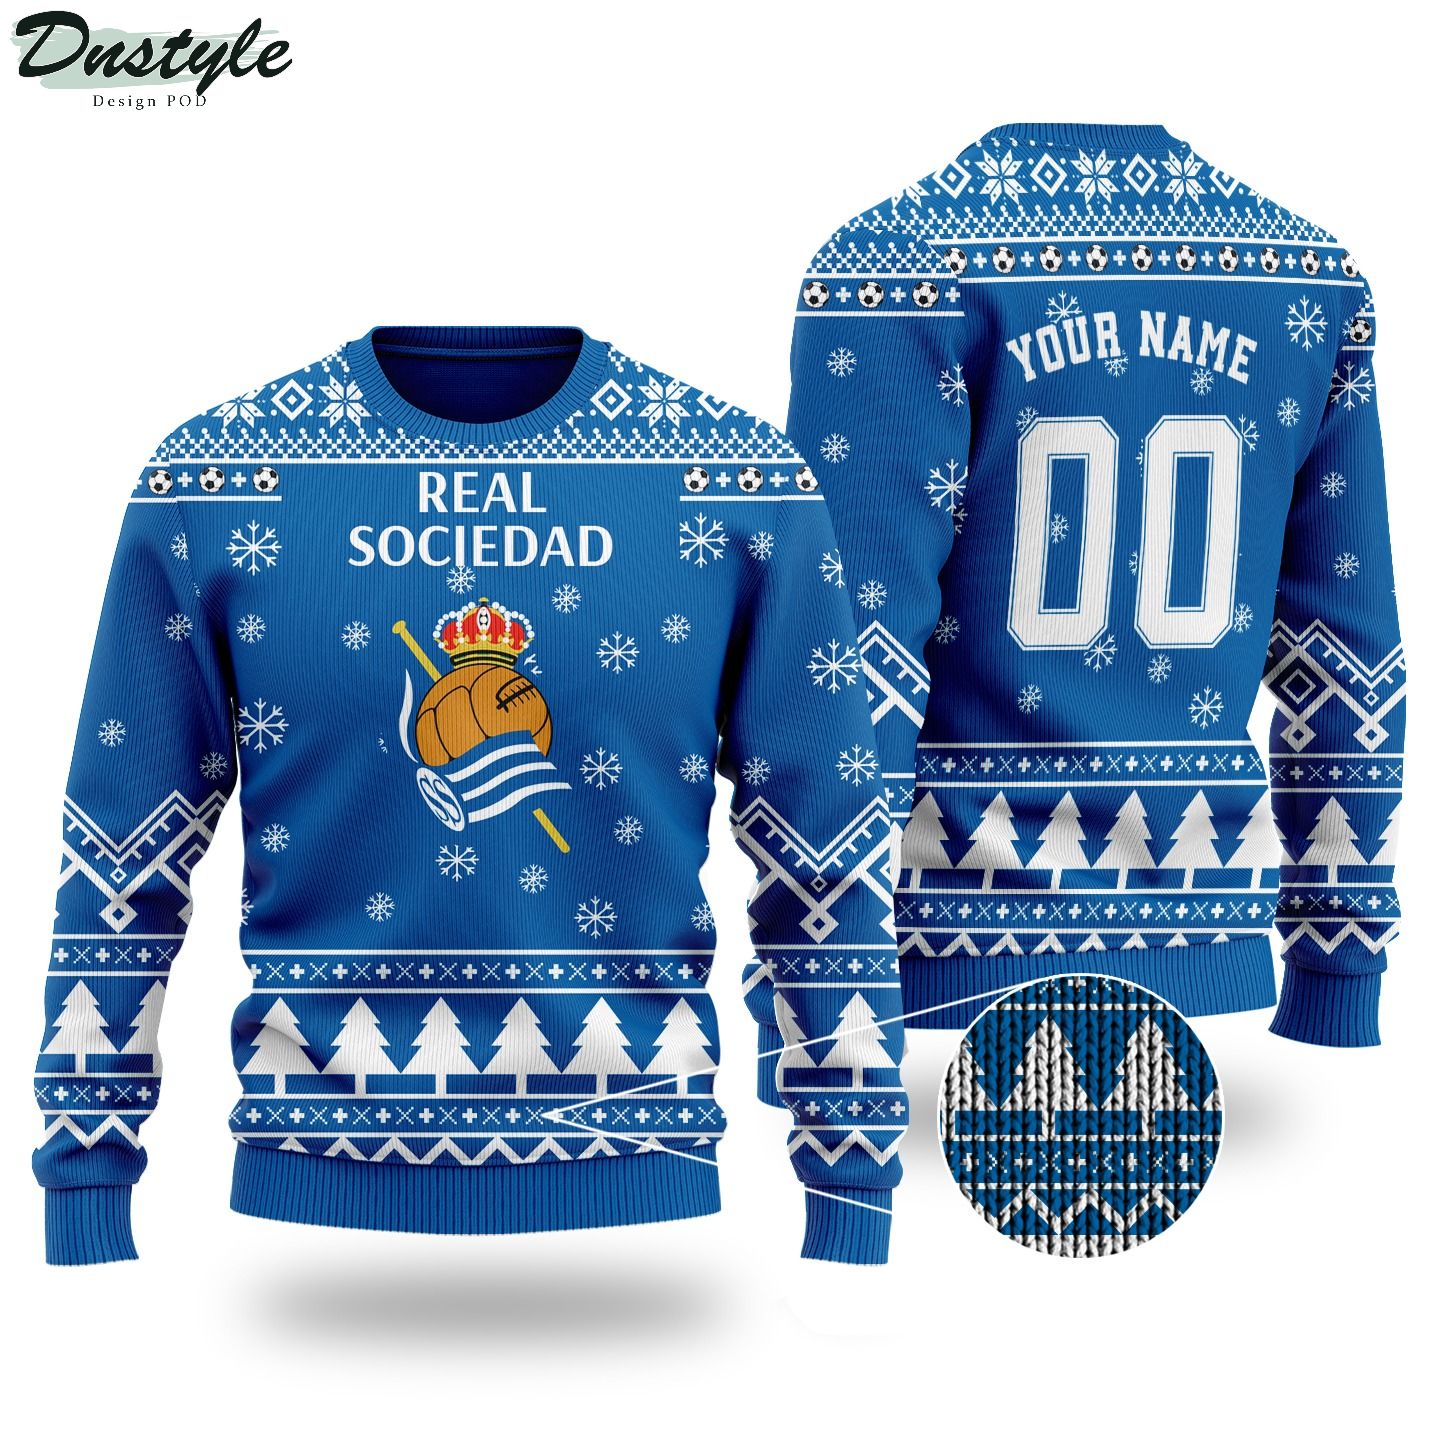 Real sociedad custom name and number ugly sweater